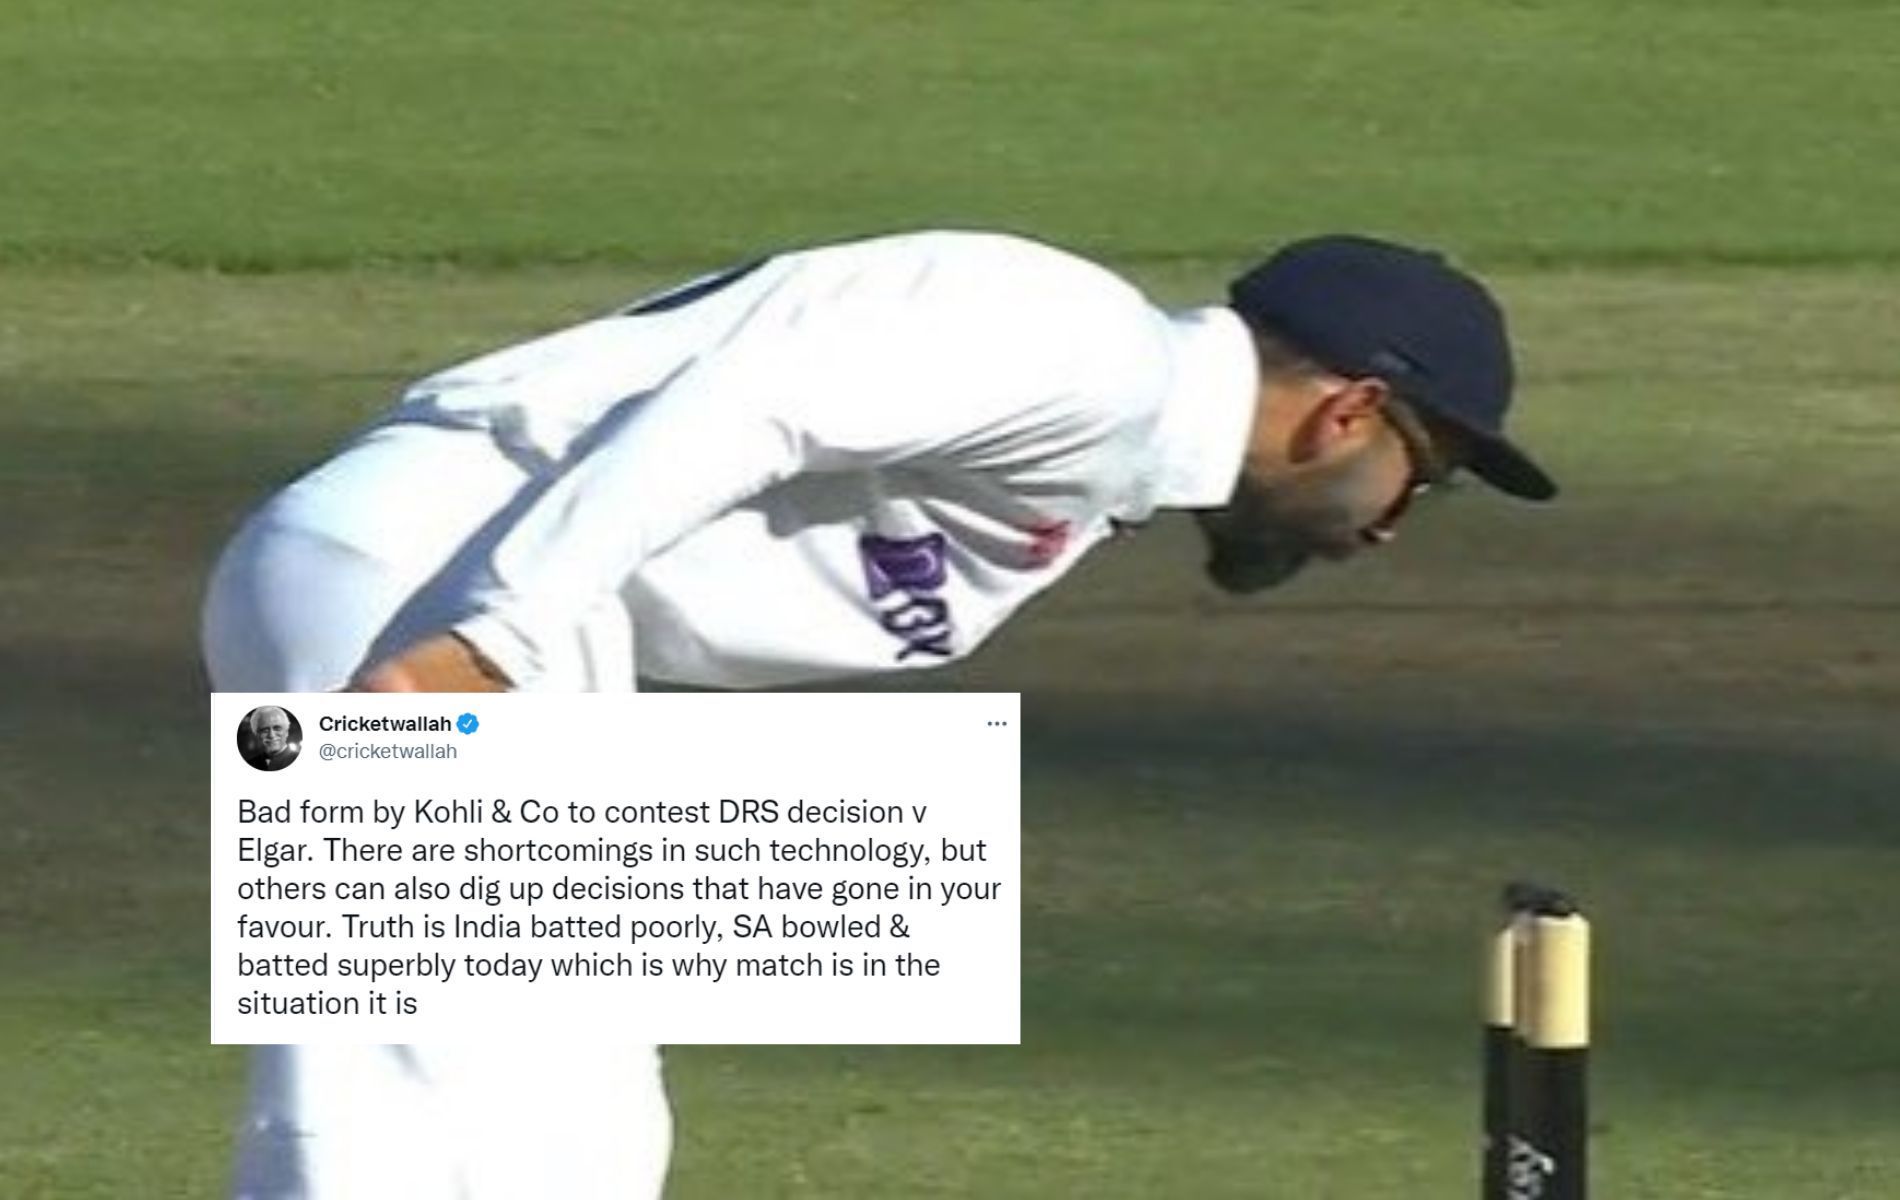 Virat Kohli had some snide remarks for the stump mic after a DRS call against India.